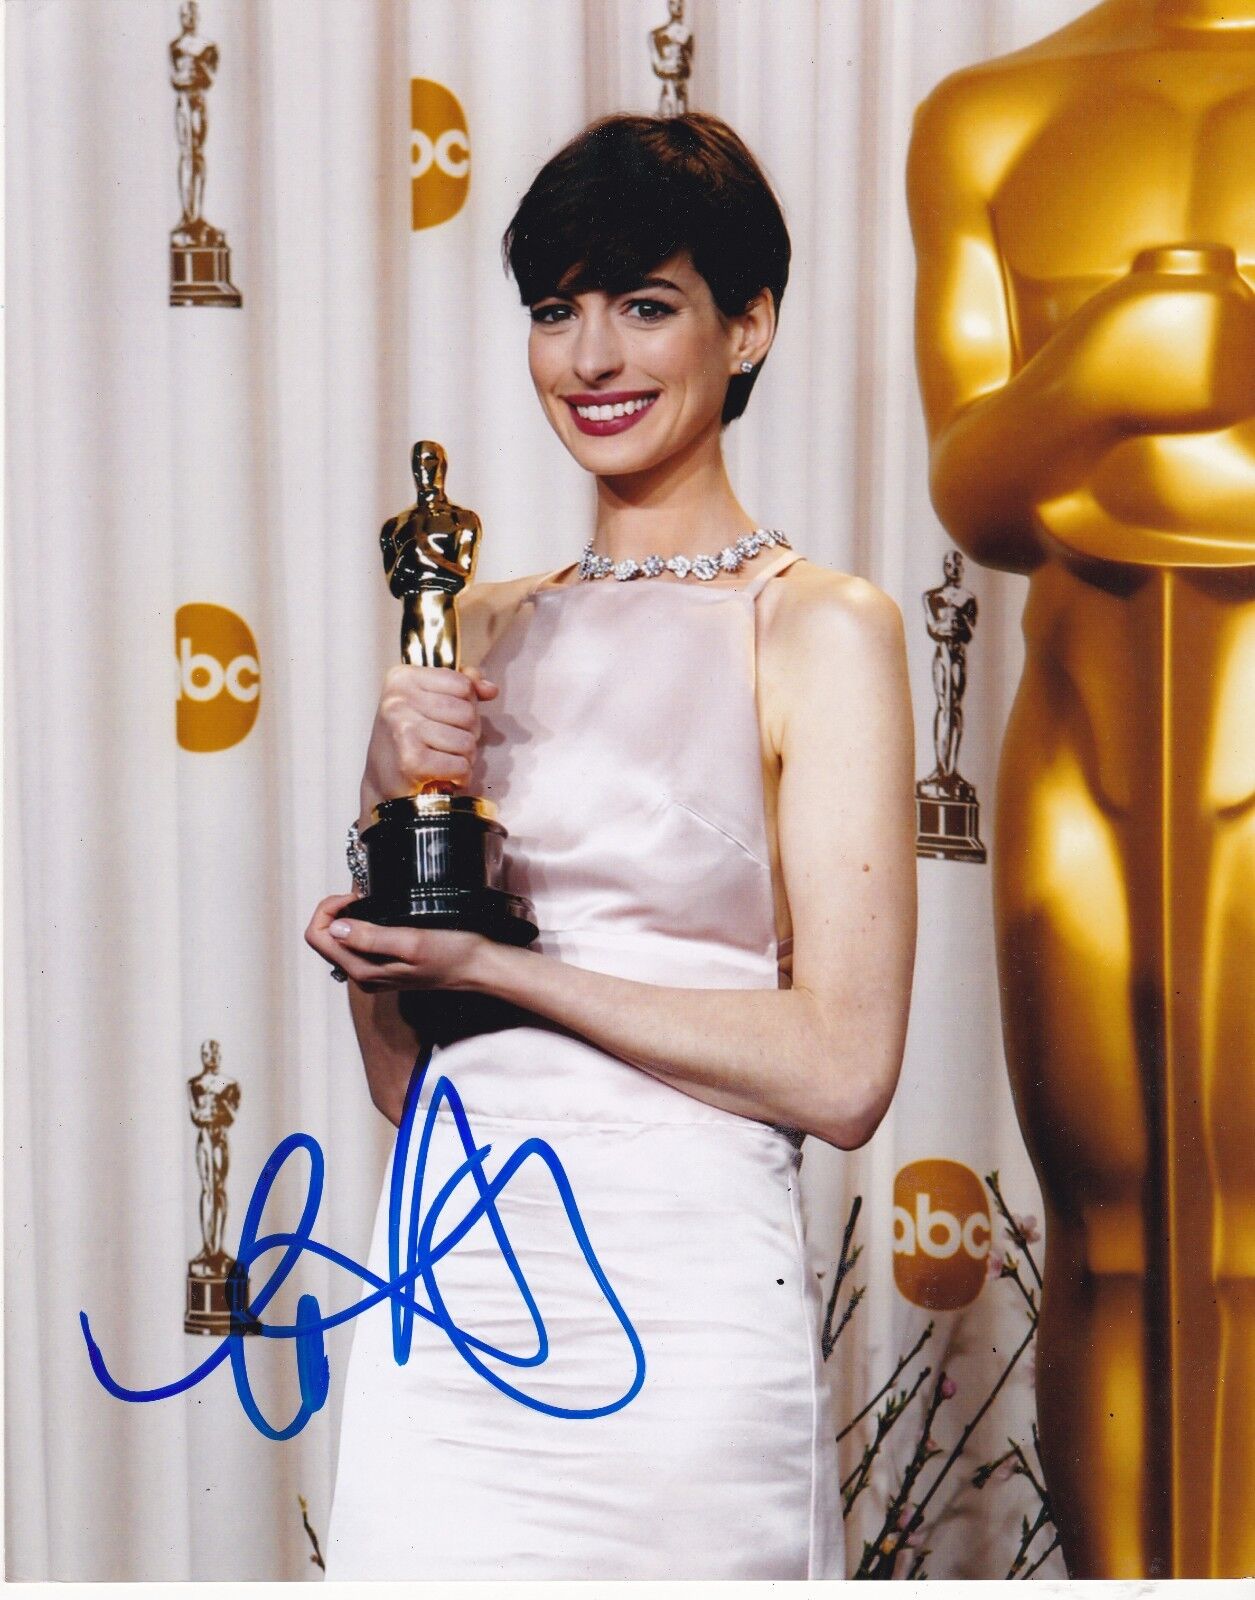 ANNE HATHAWAY SIGNED 8X10 PHOTO AUTHENTIC AUTOGRAPH PROOF CATWOMEN OSCAR COA